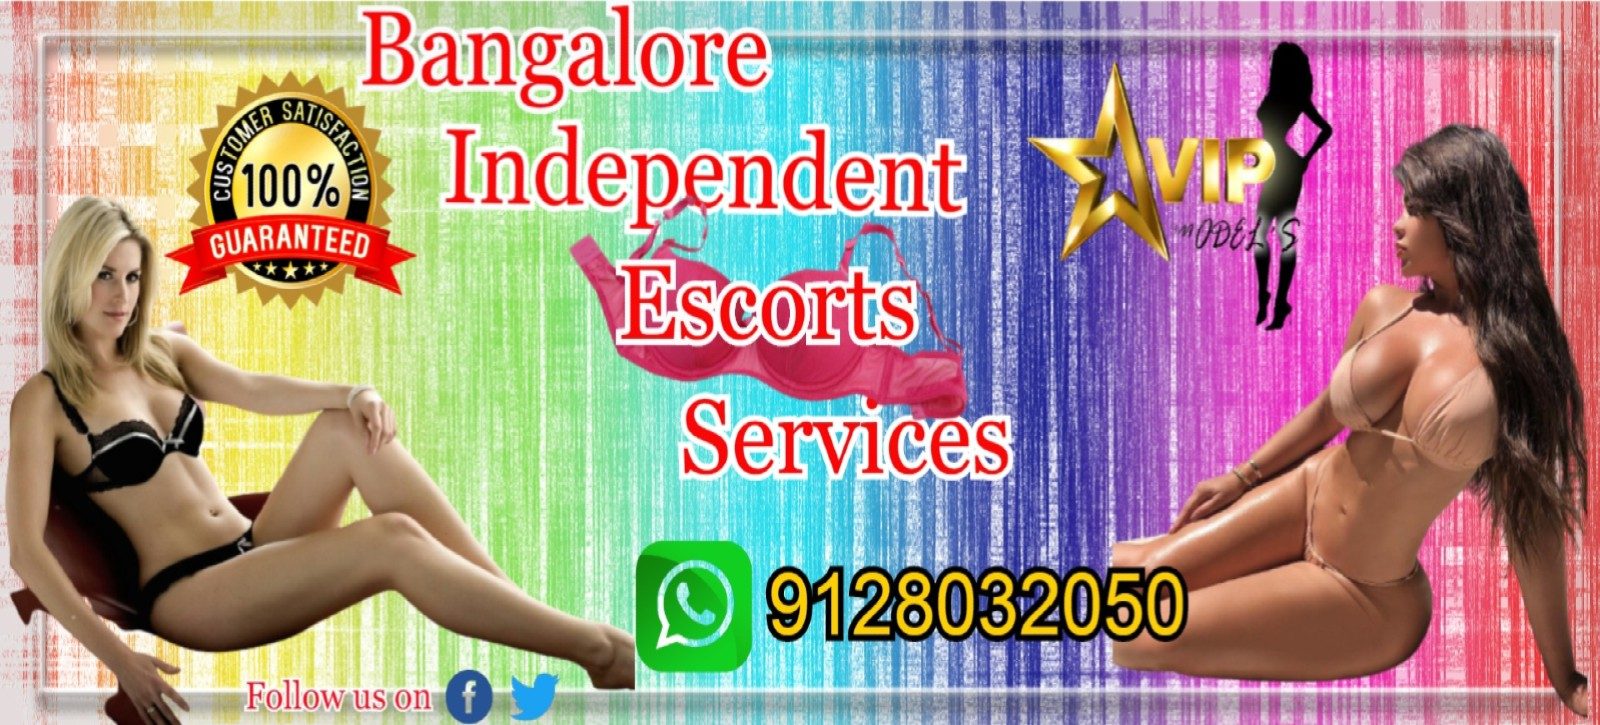 Independent escorts services